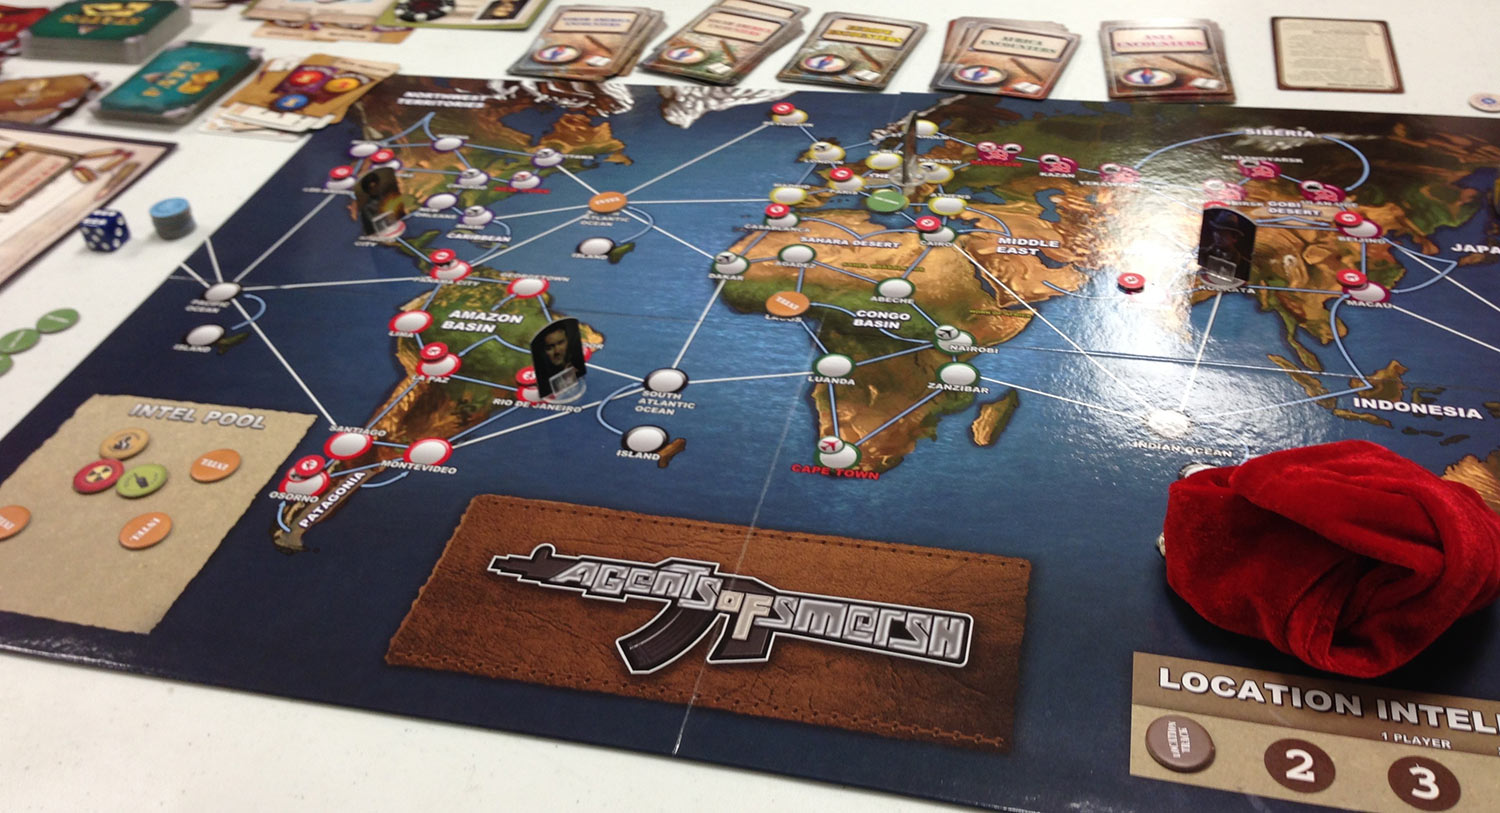 Review: Agents of Smersh